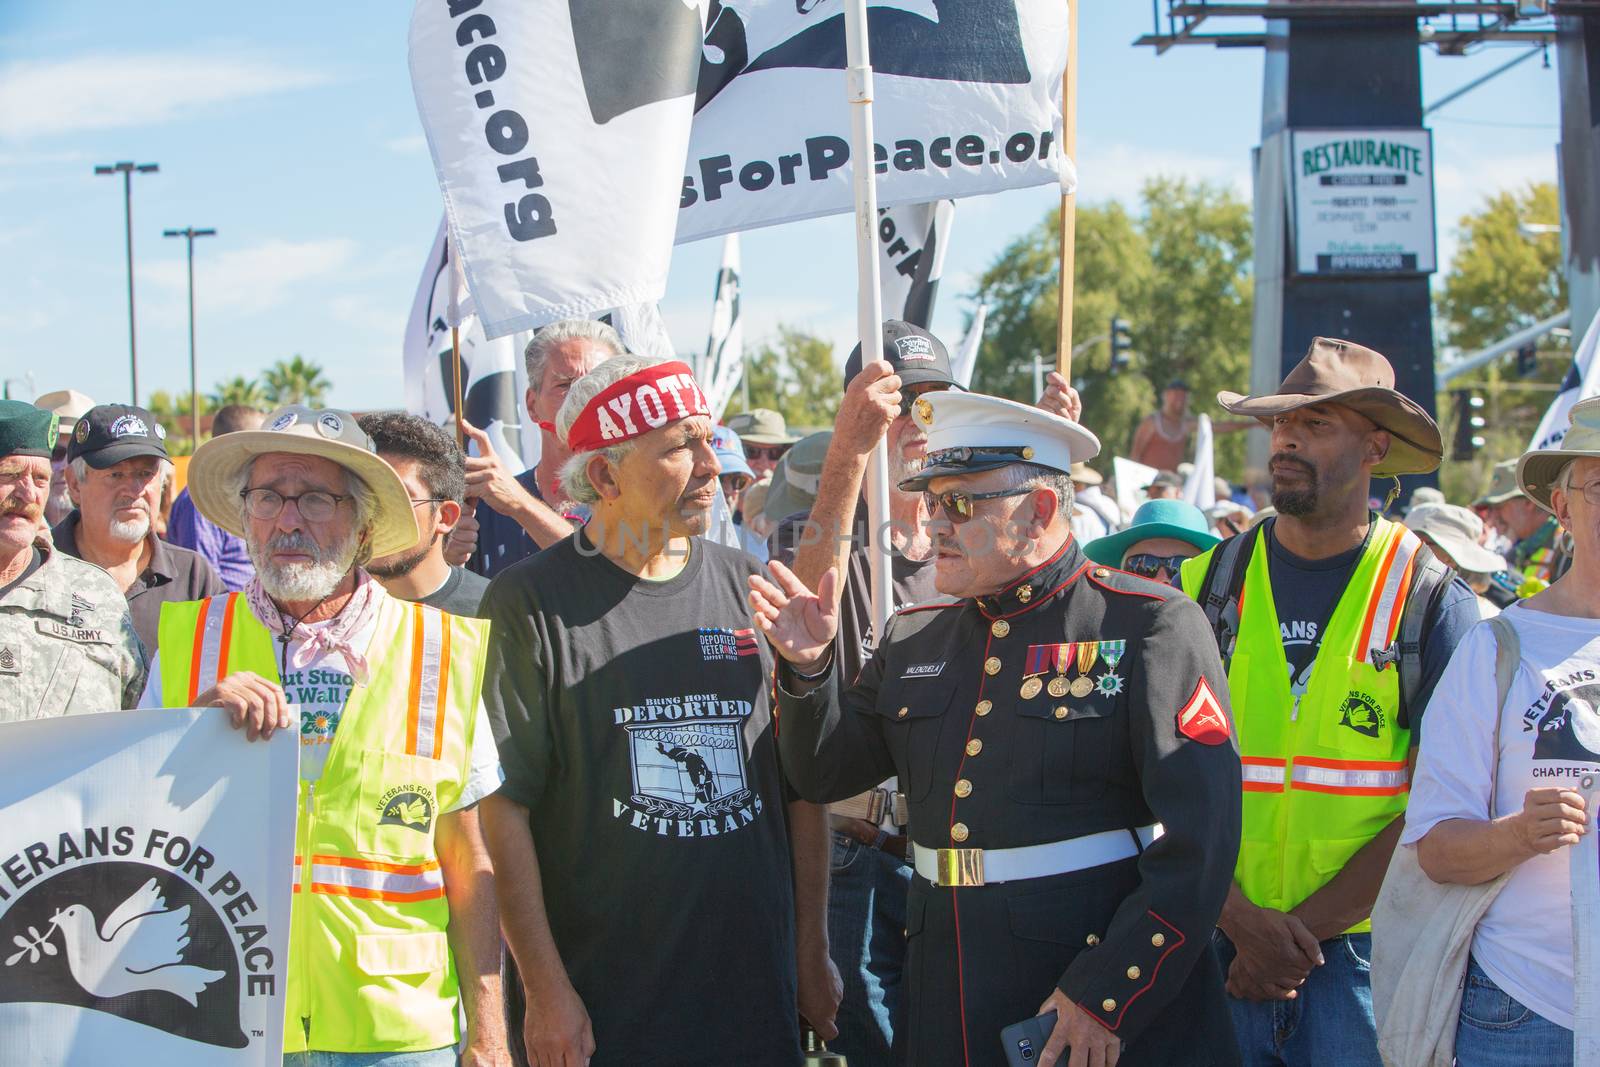 Organizers at Veterans For Peace Protest March by Creatista